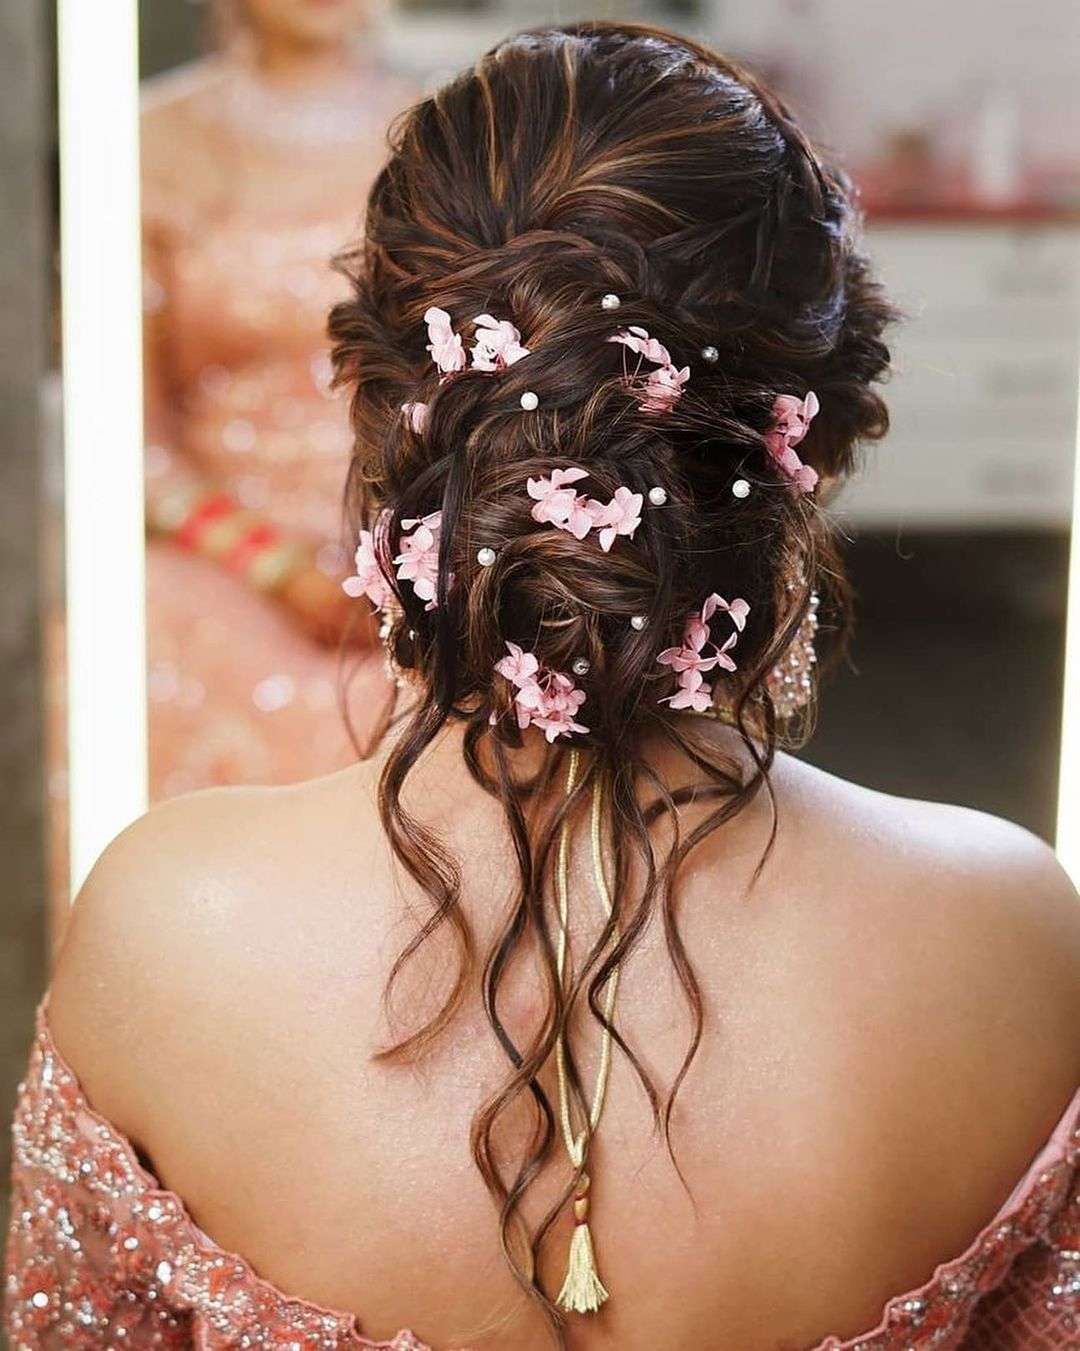 50 Chic Wedding Updos for Every Wedding Style and Hair Type